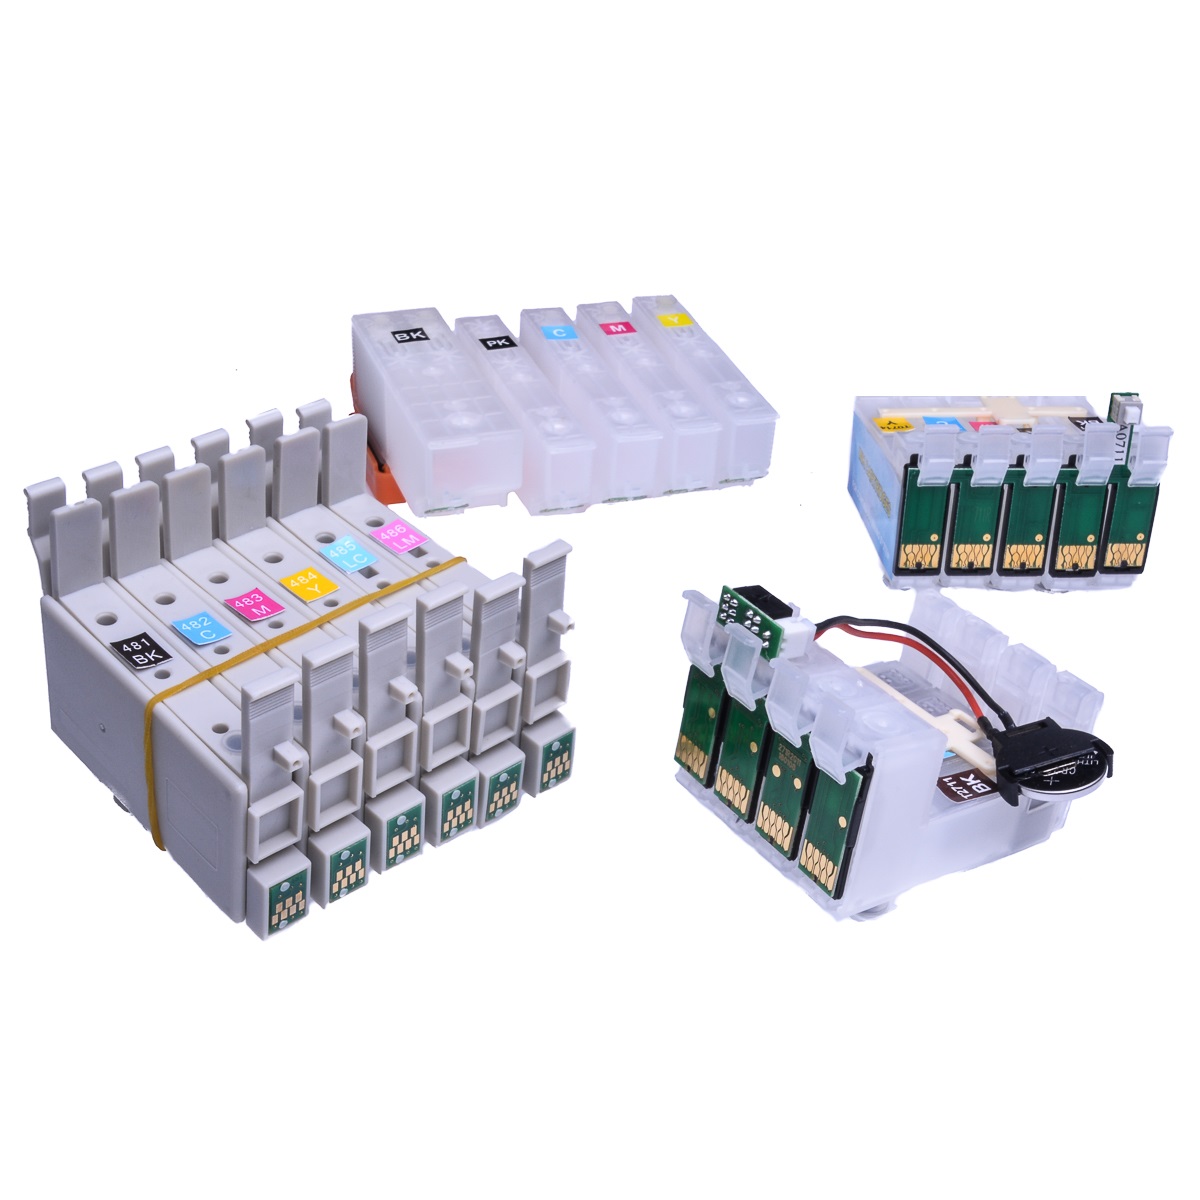 Auto Reset Ink Cartridge fits Epson R2880 Continuous Ink ...